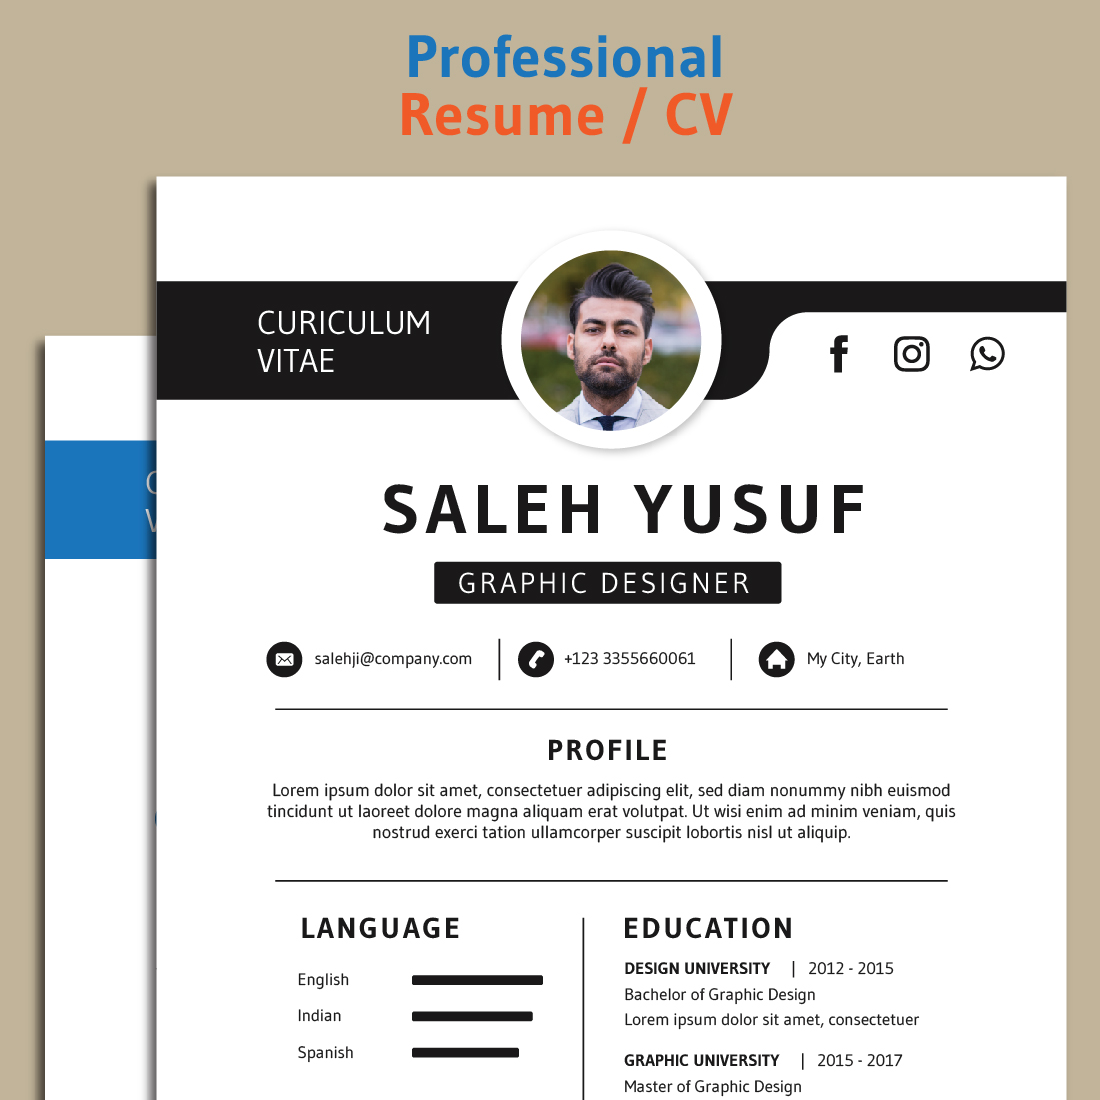 Professional Resume Template For Graphic Designers | CV Template | Blue and Black Theme preview image.